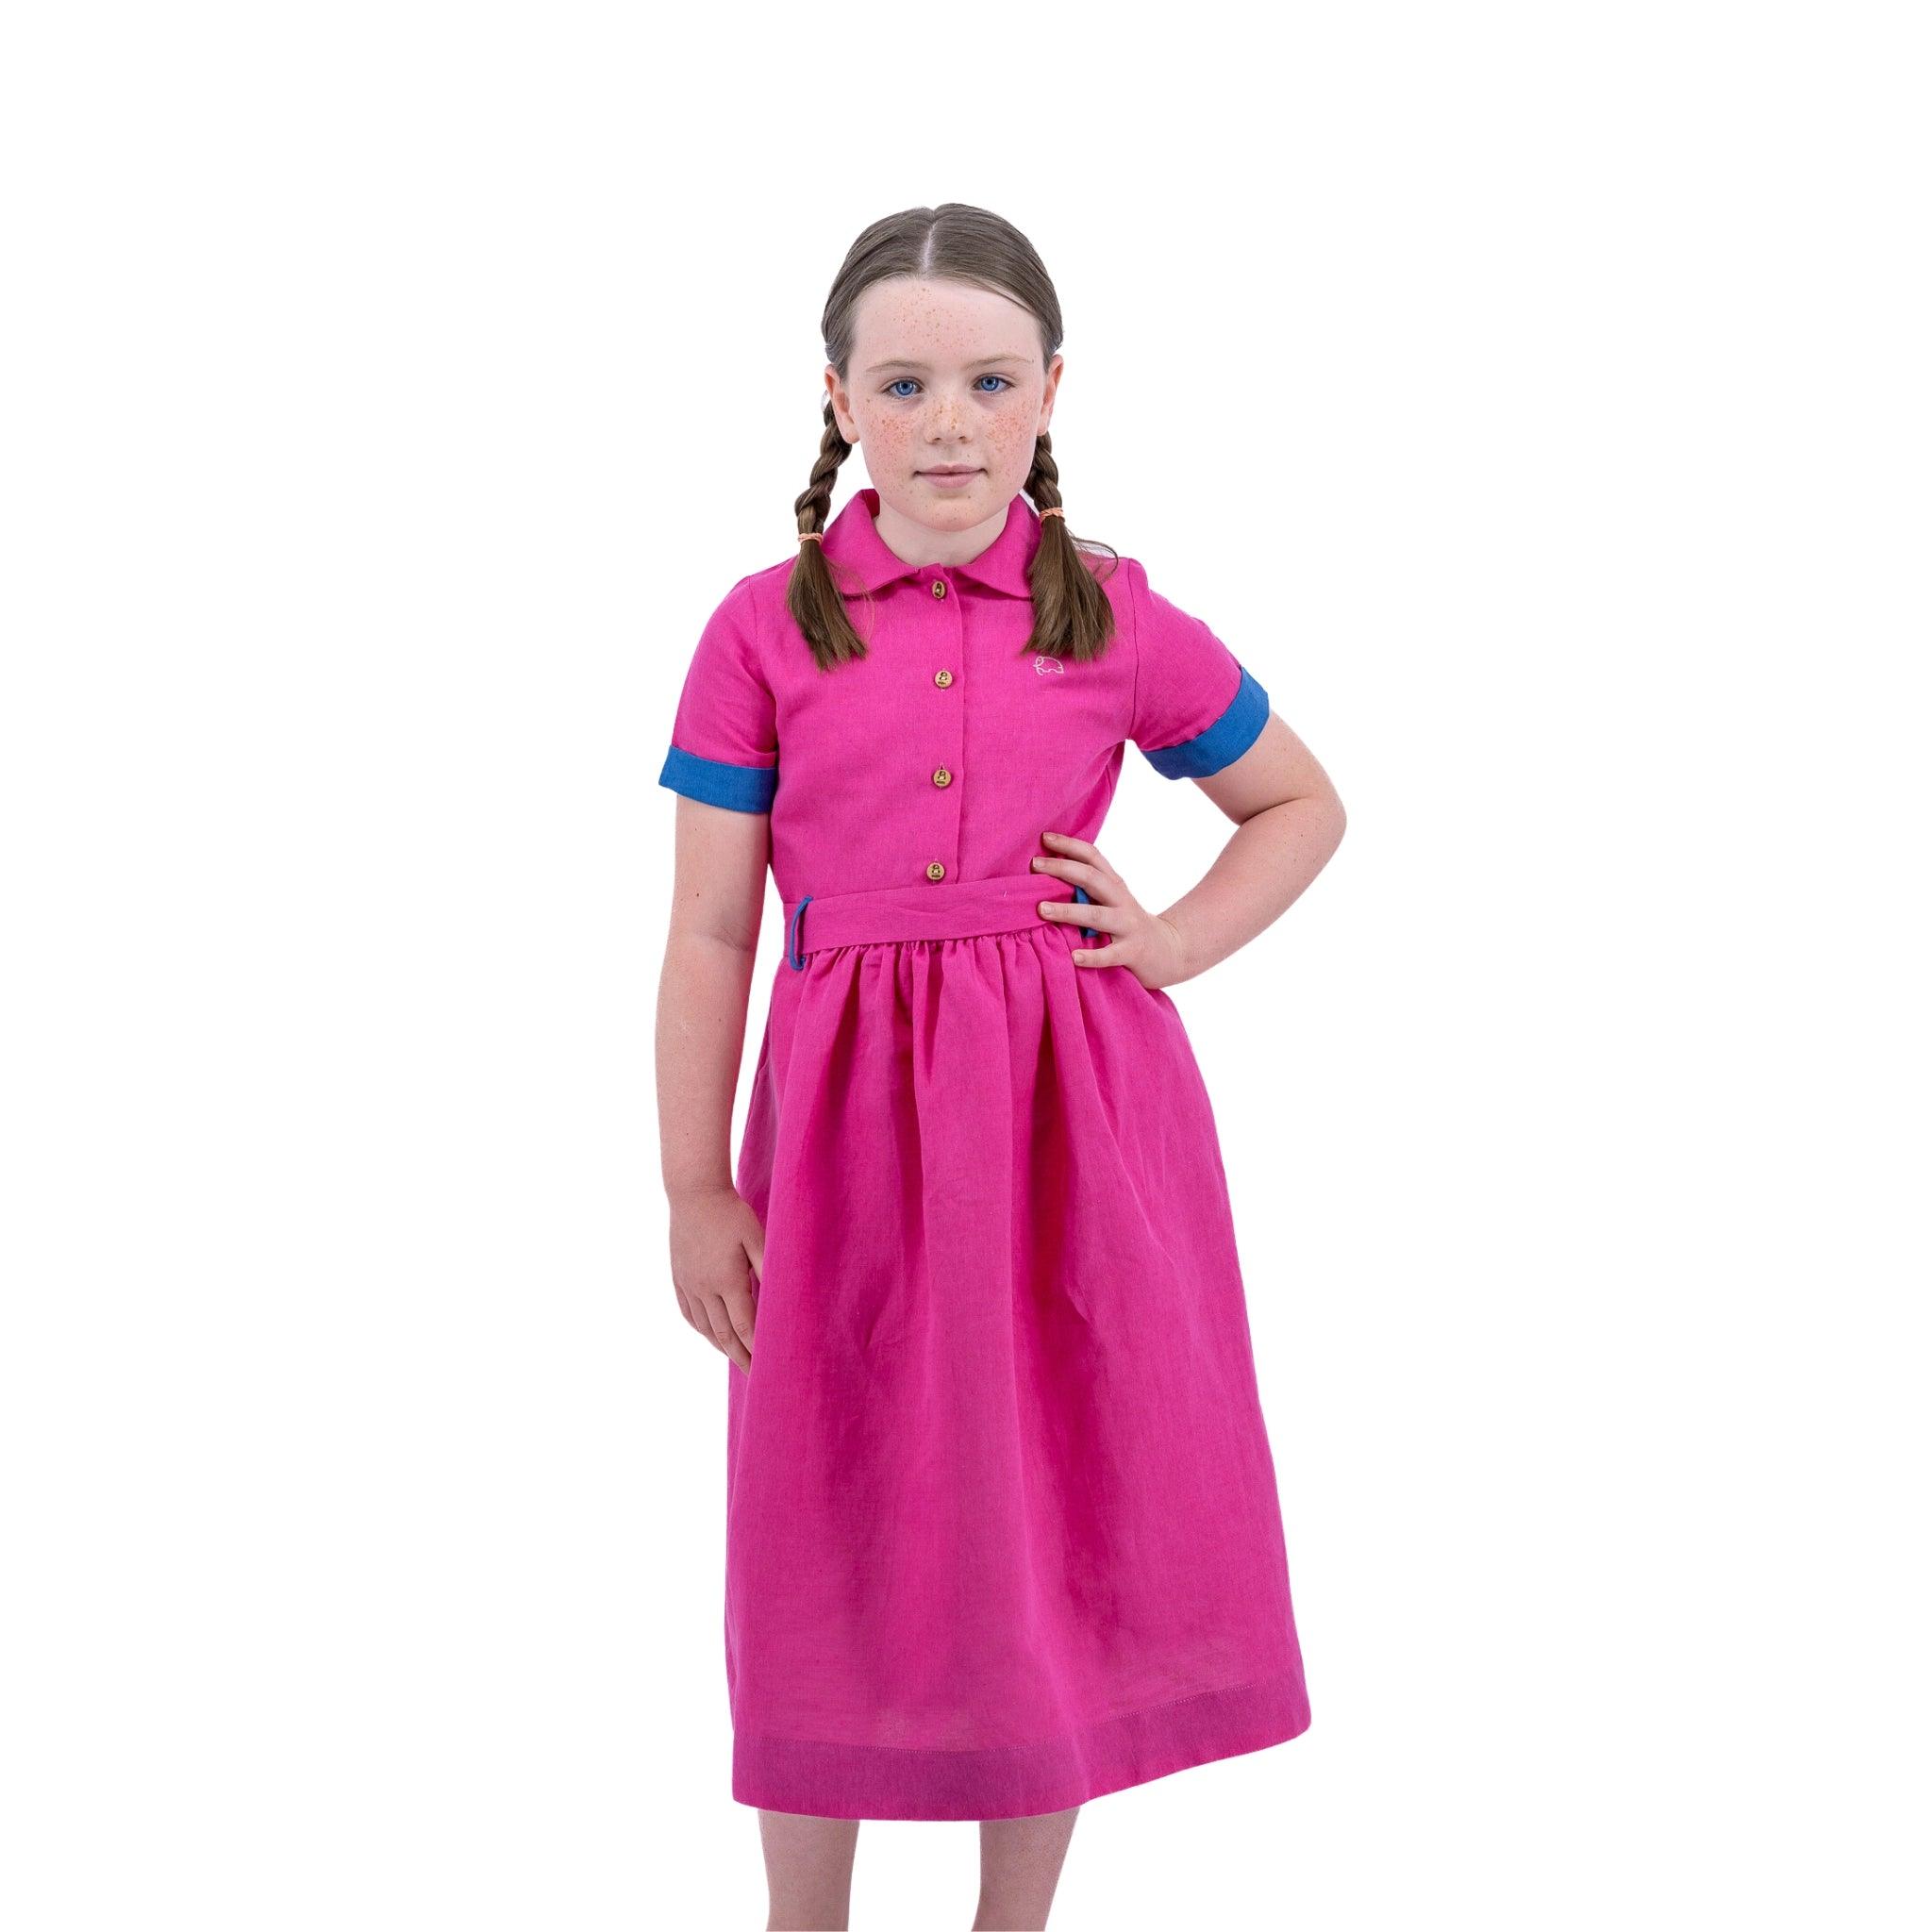 Young girl in a Karee fuchsia purple linen dress with blue sleeves, standing with hands on hips against a white background.